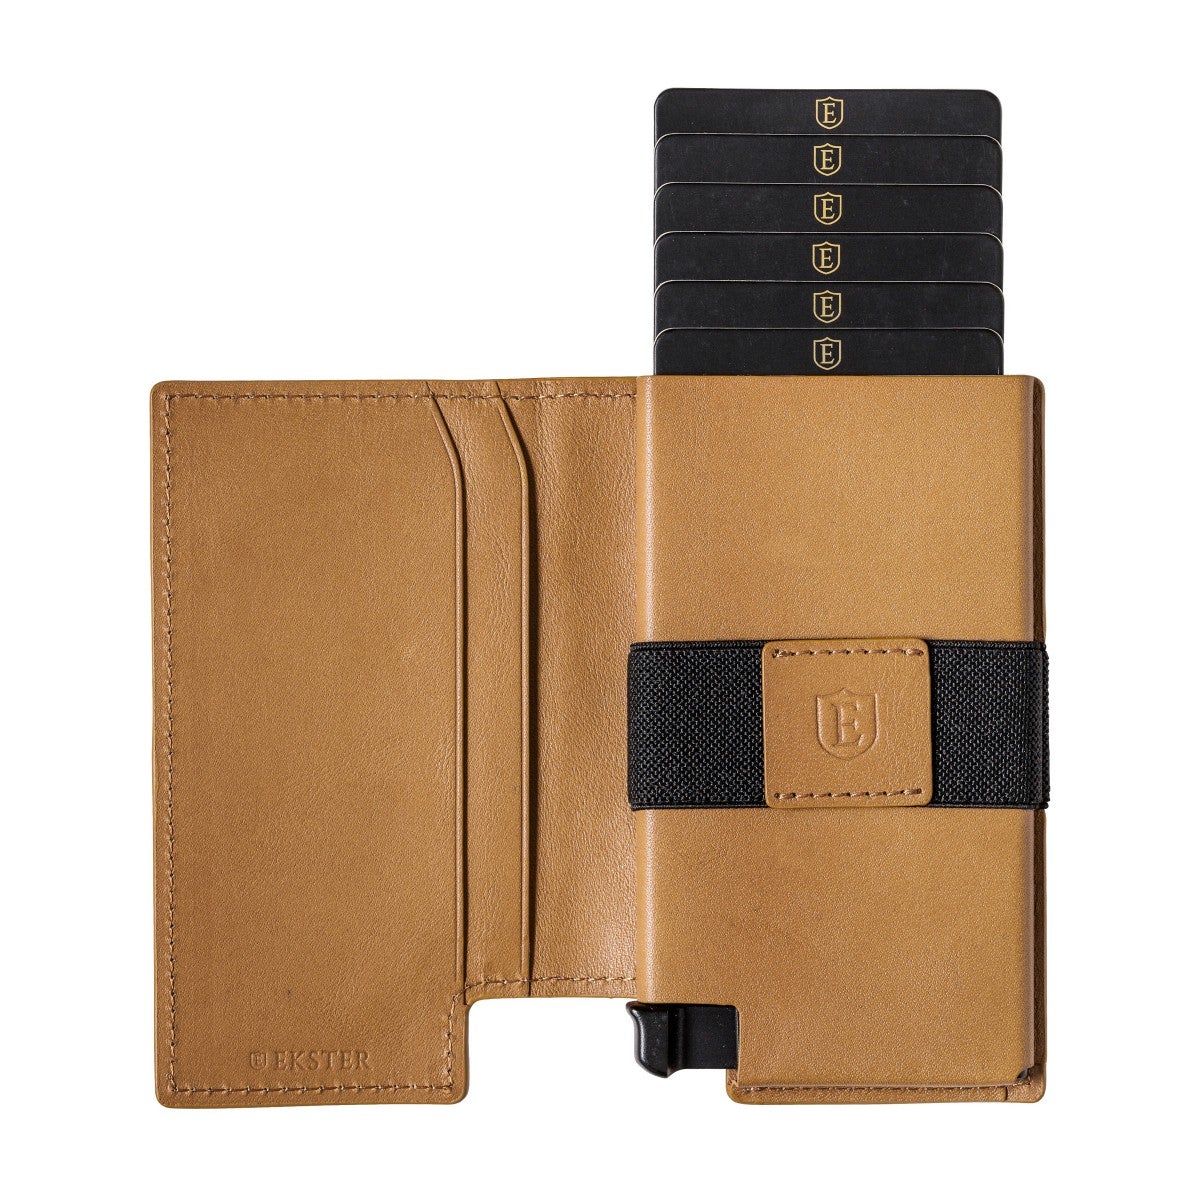 Lifestyle - Parliament Wallet - SWAGGER Magazine